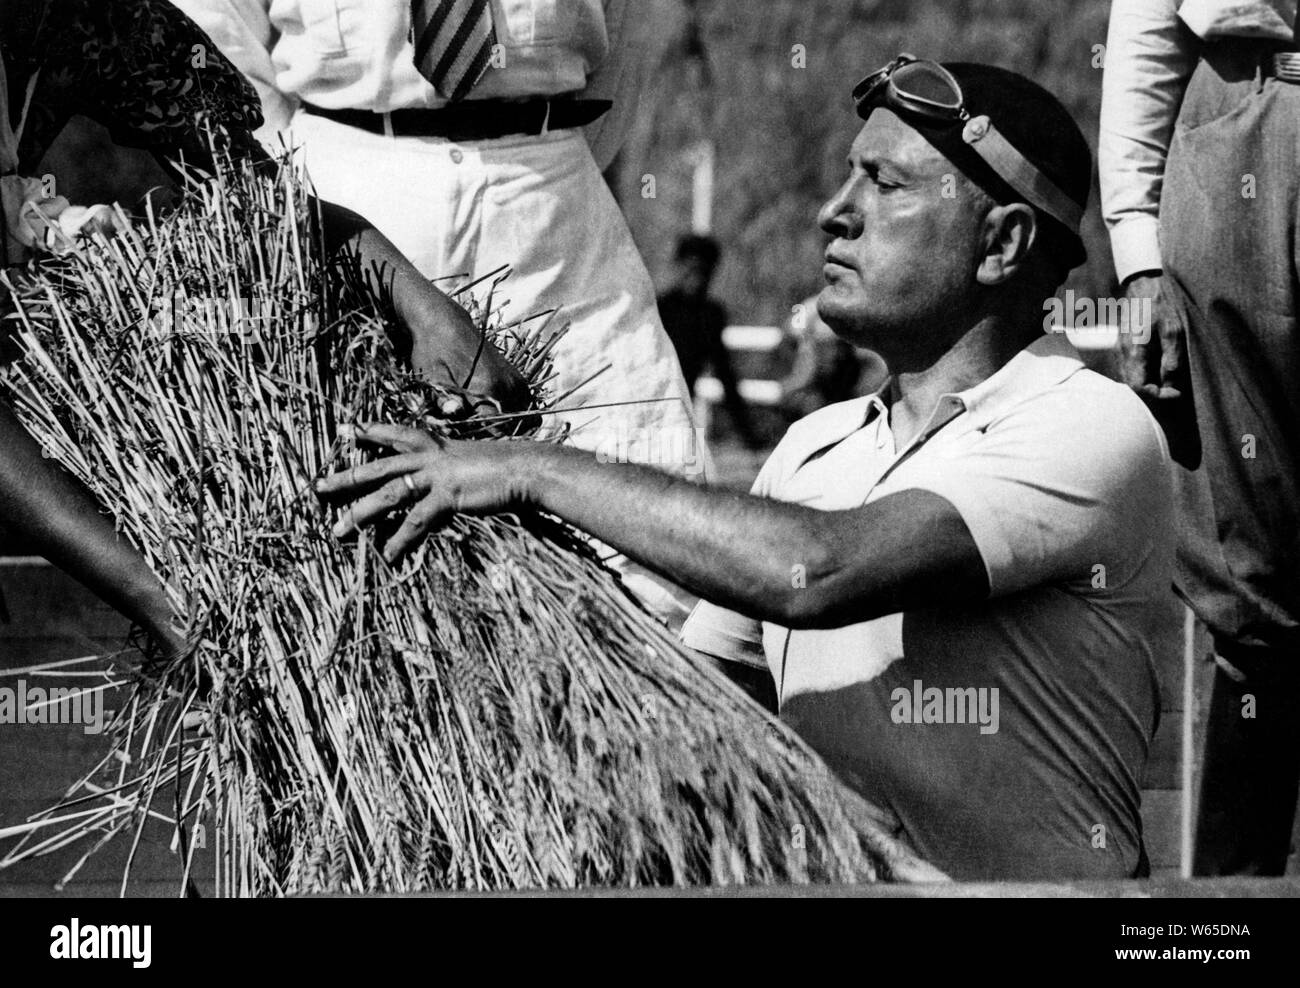 Pontine reclamation service, benito mussolini during the threshing of wheat in sabaudia, 1934 Stock Photo